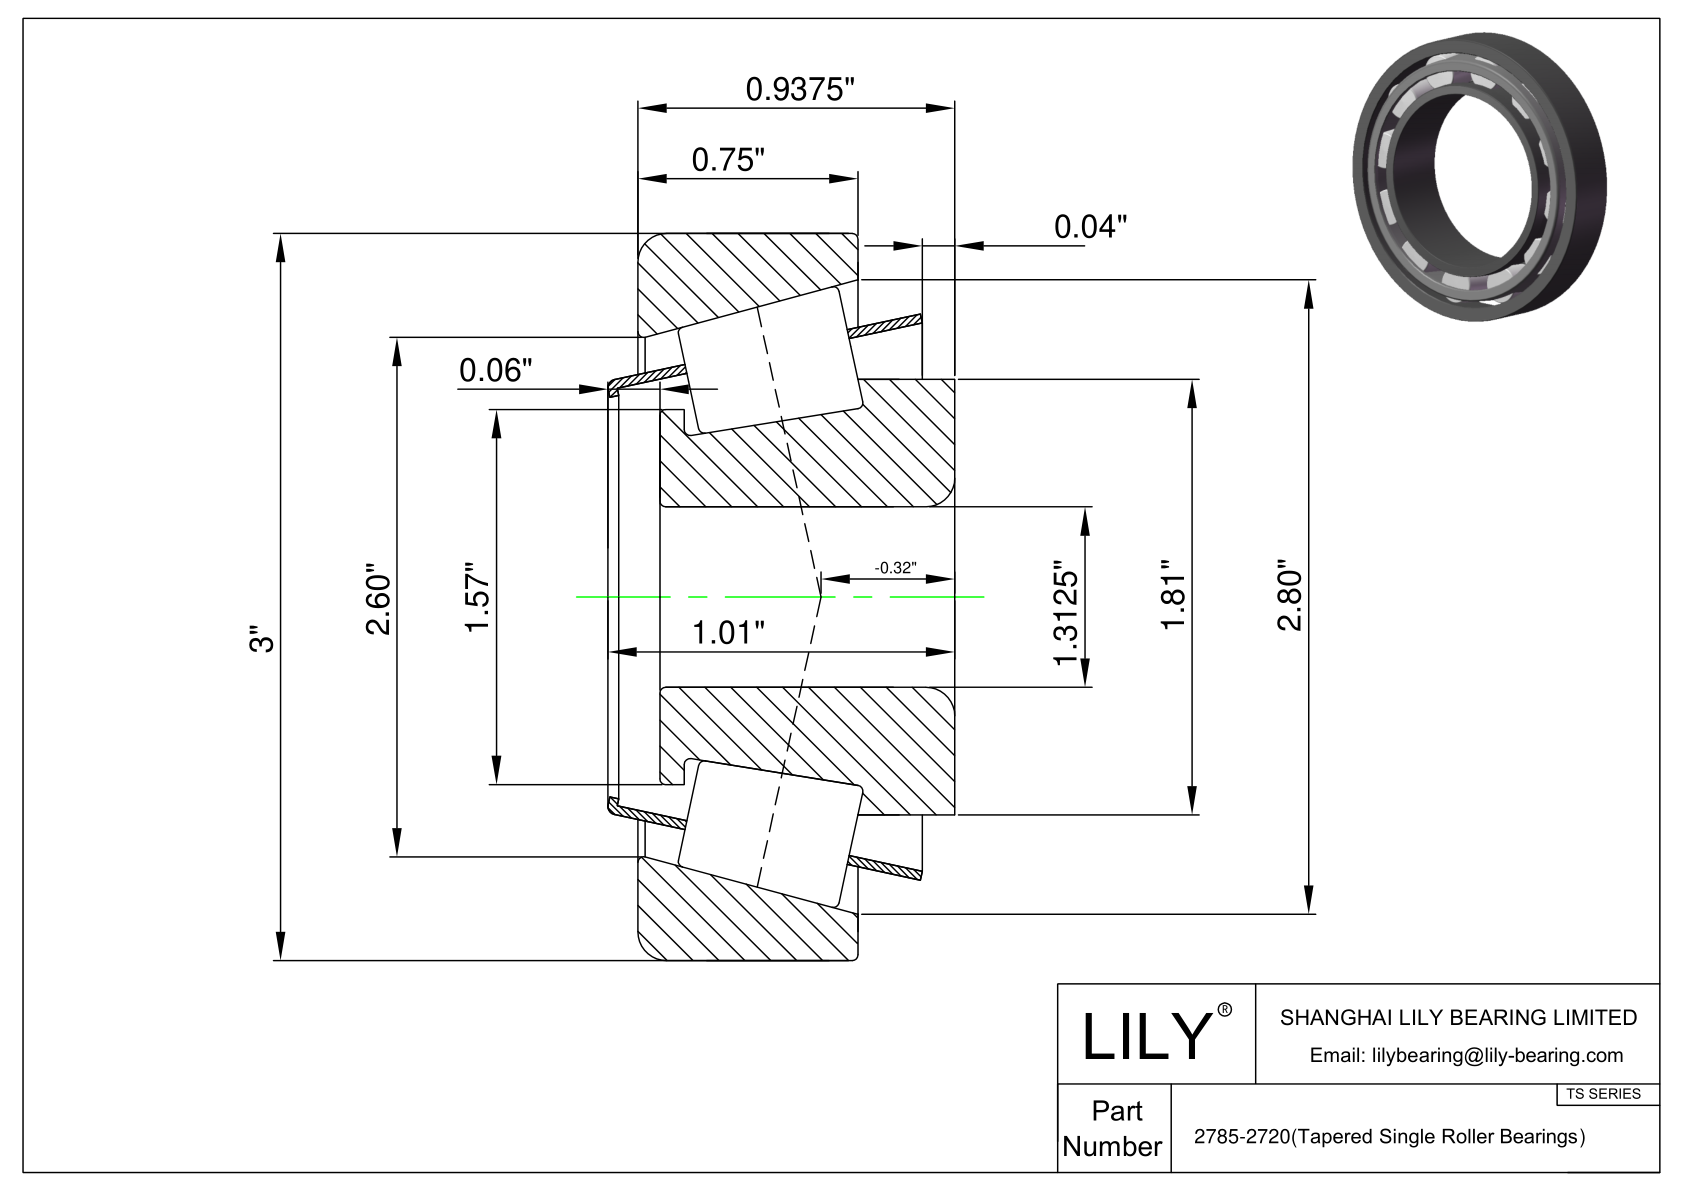 2785-2720 TS (Tapered Single Roller Bearings) (Imperial) cad drawing